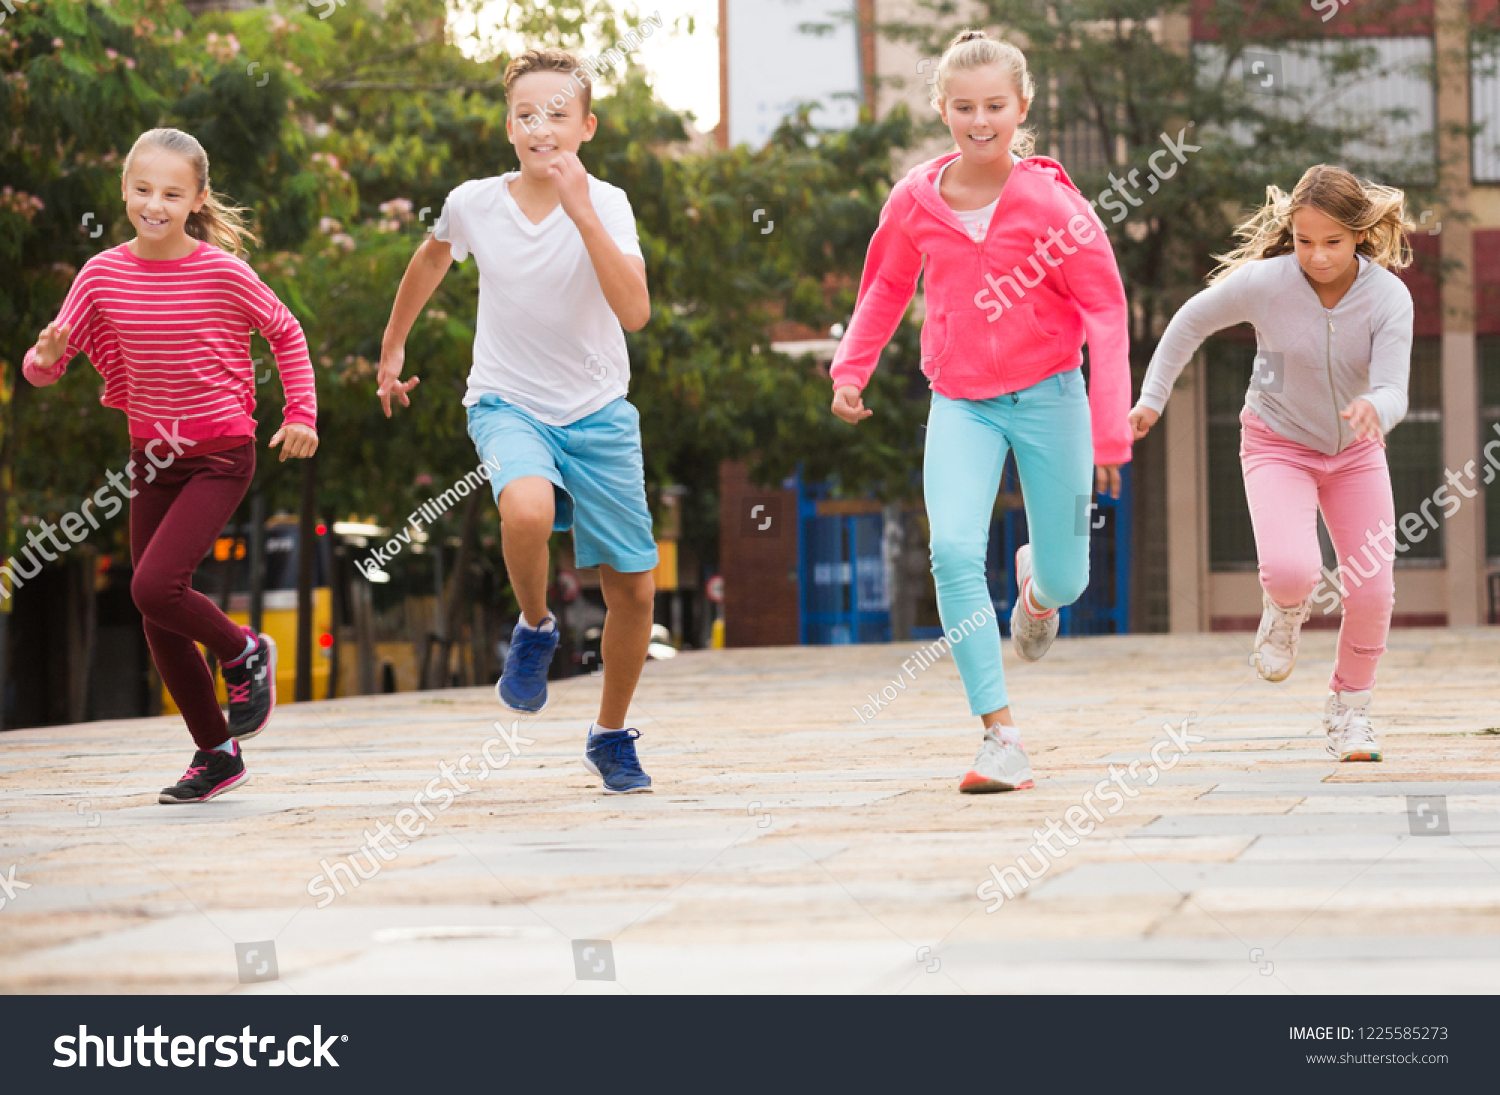 Company of active kids are jogning together in the park. #1225585273